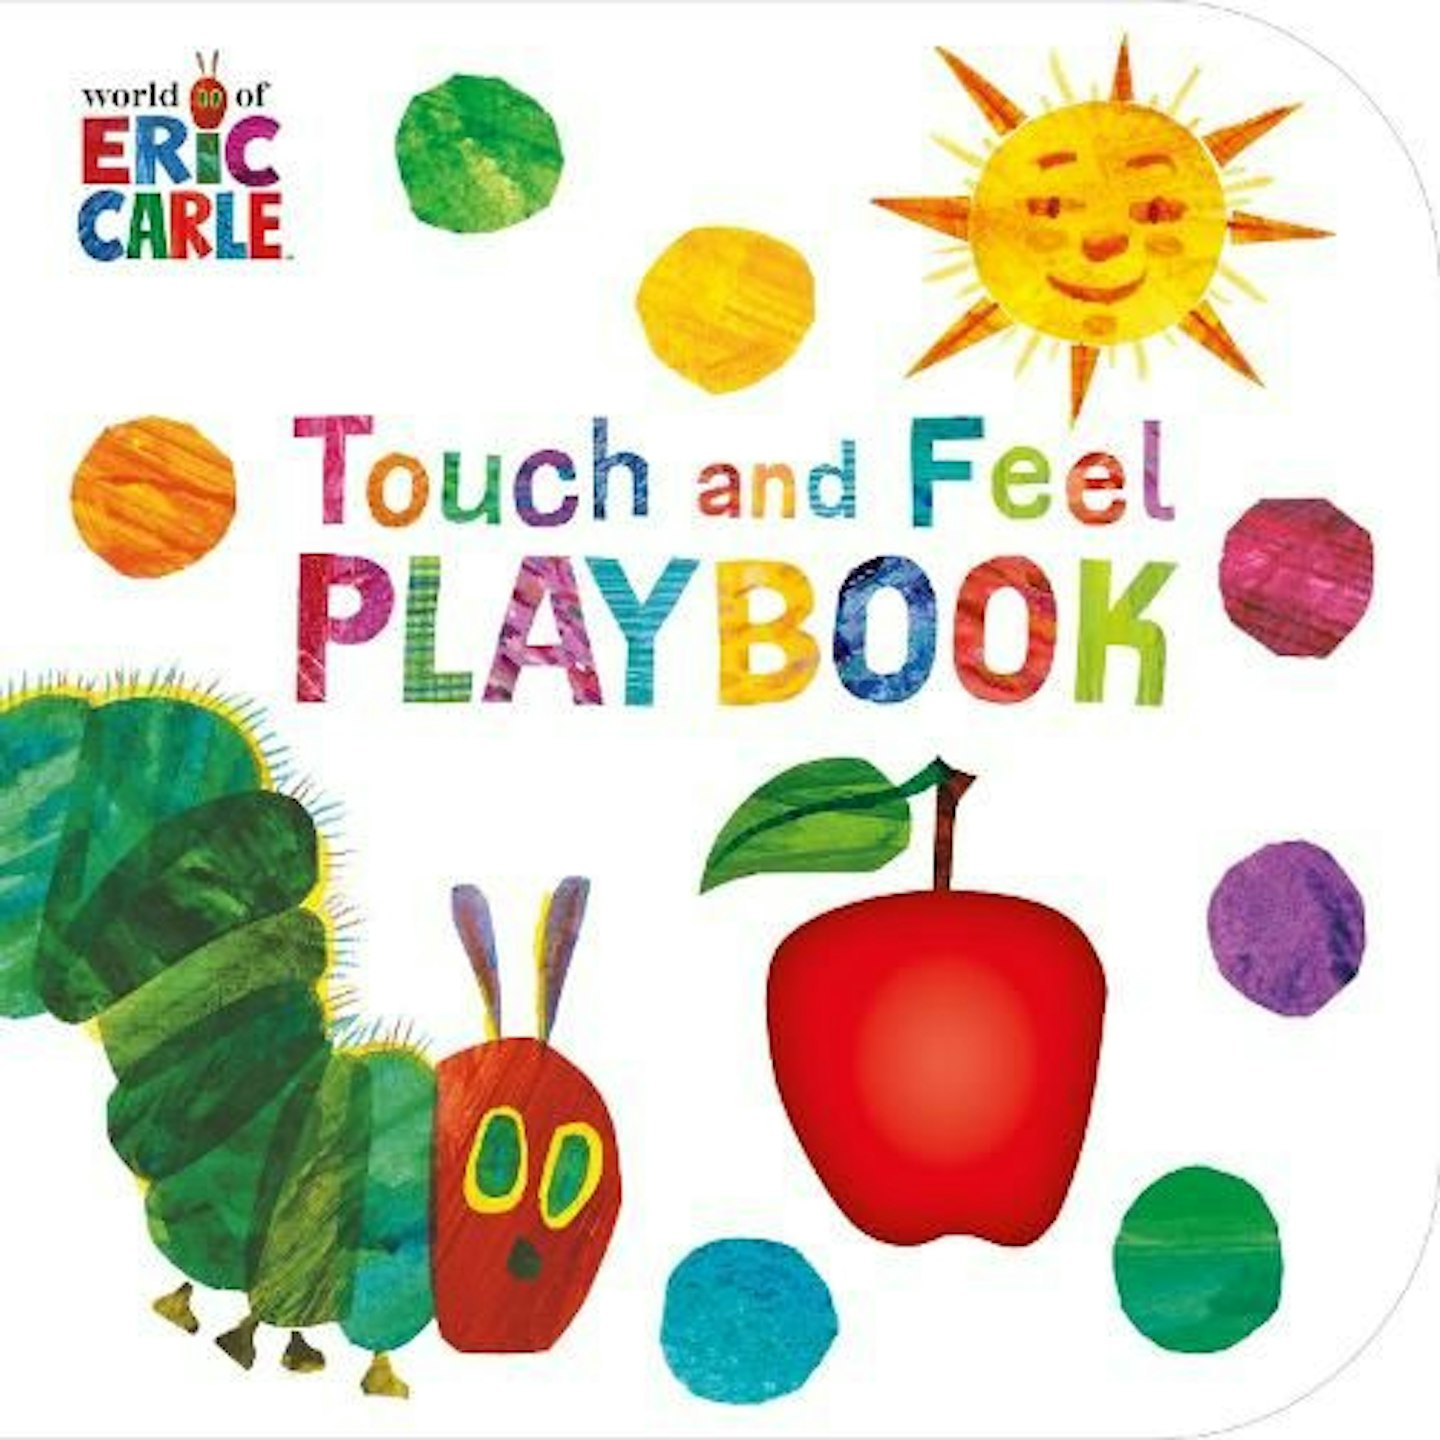 The Very Hungry Caterpillar_ Touch and Feel Playbook